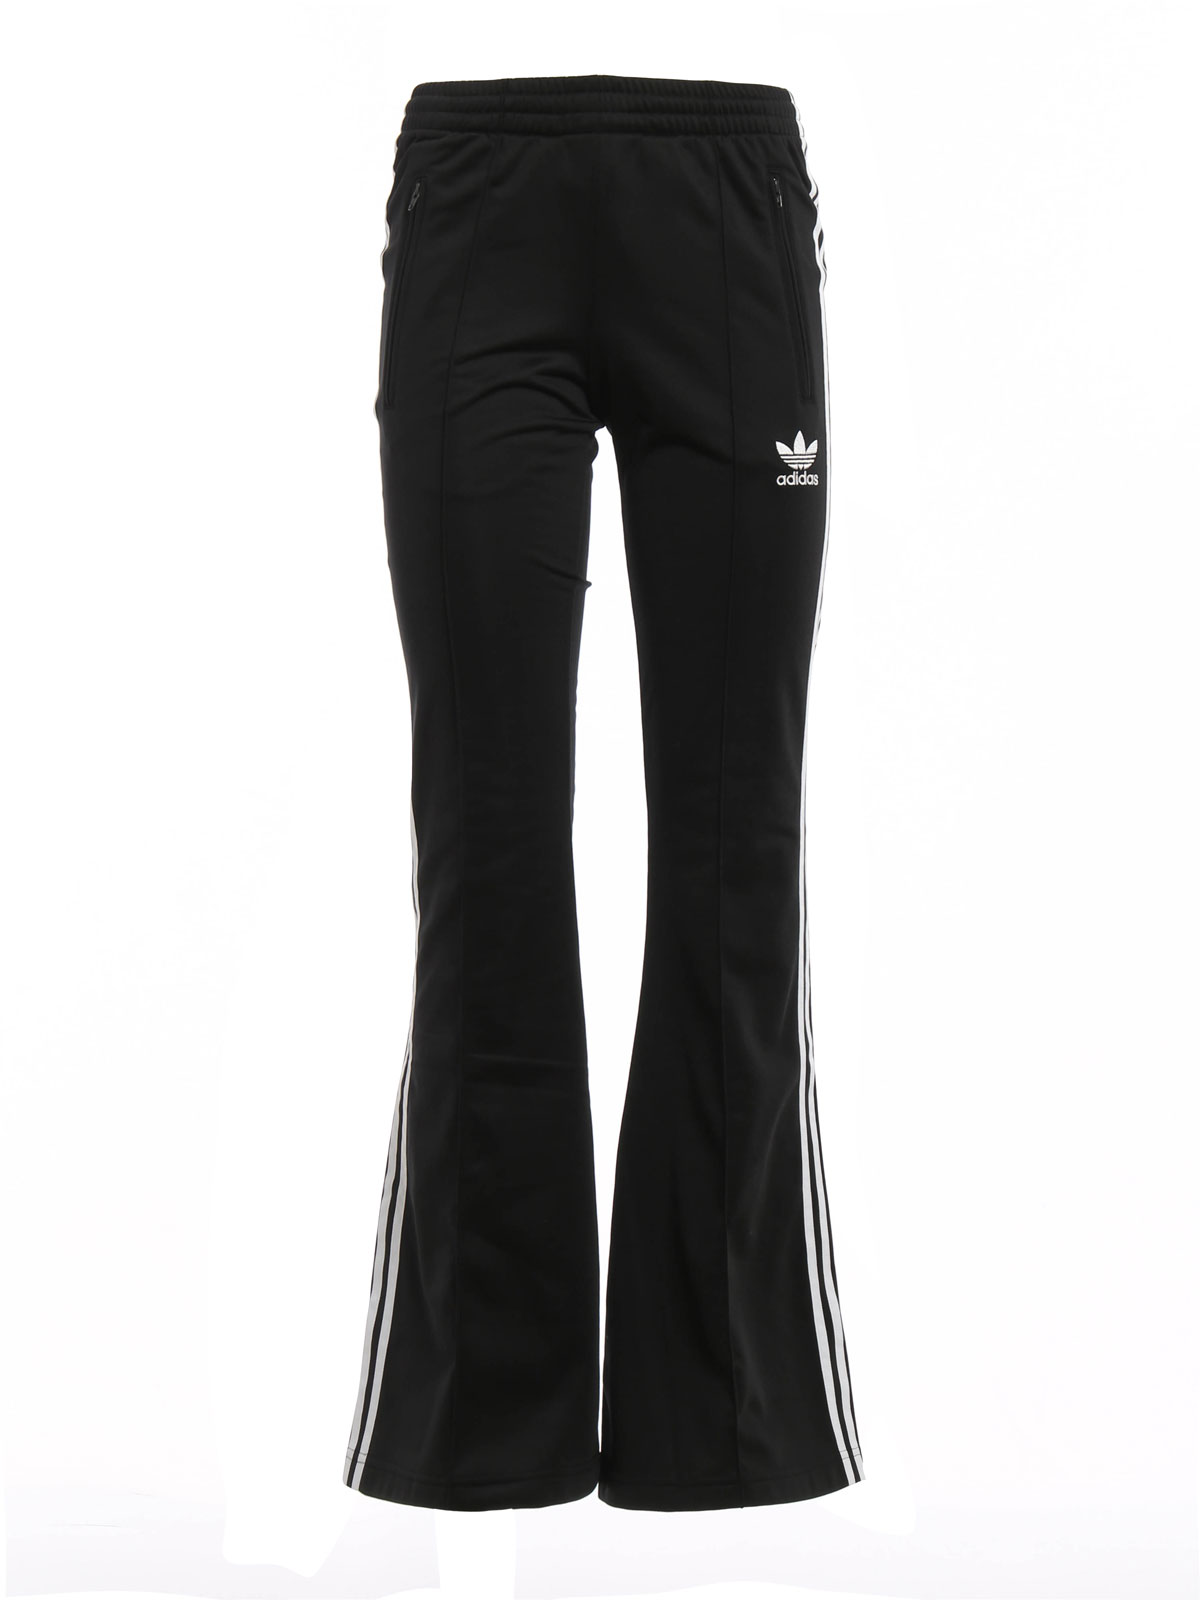 Adidas - Flared tracksuit bottoms 